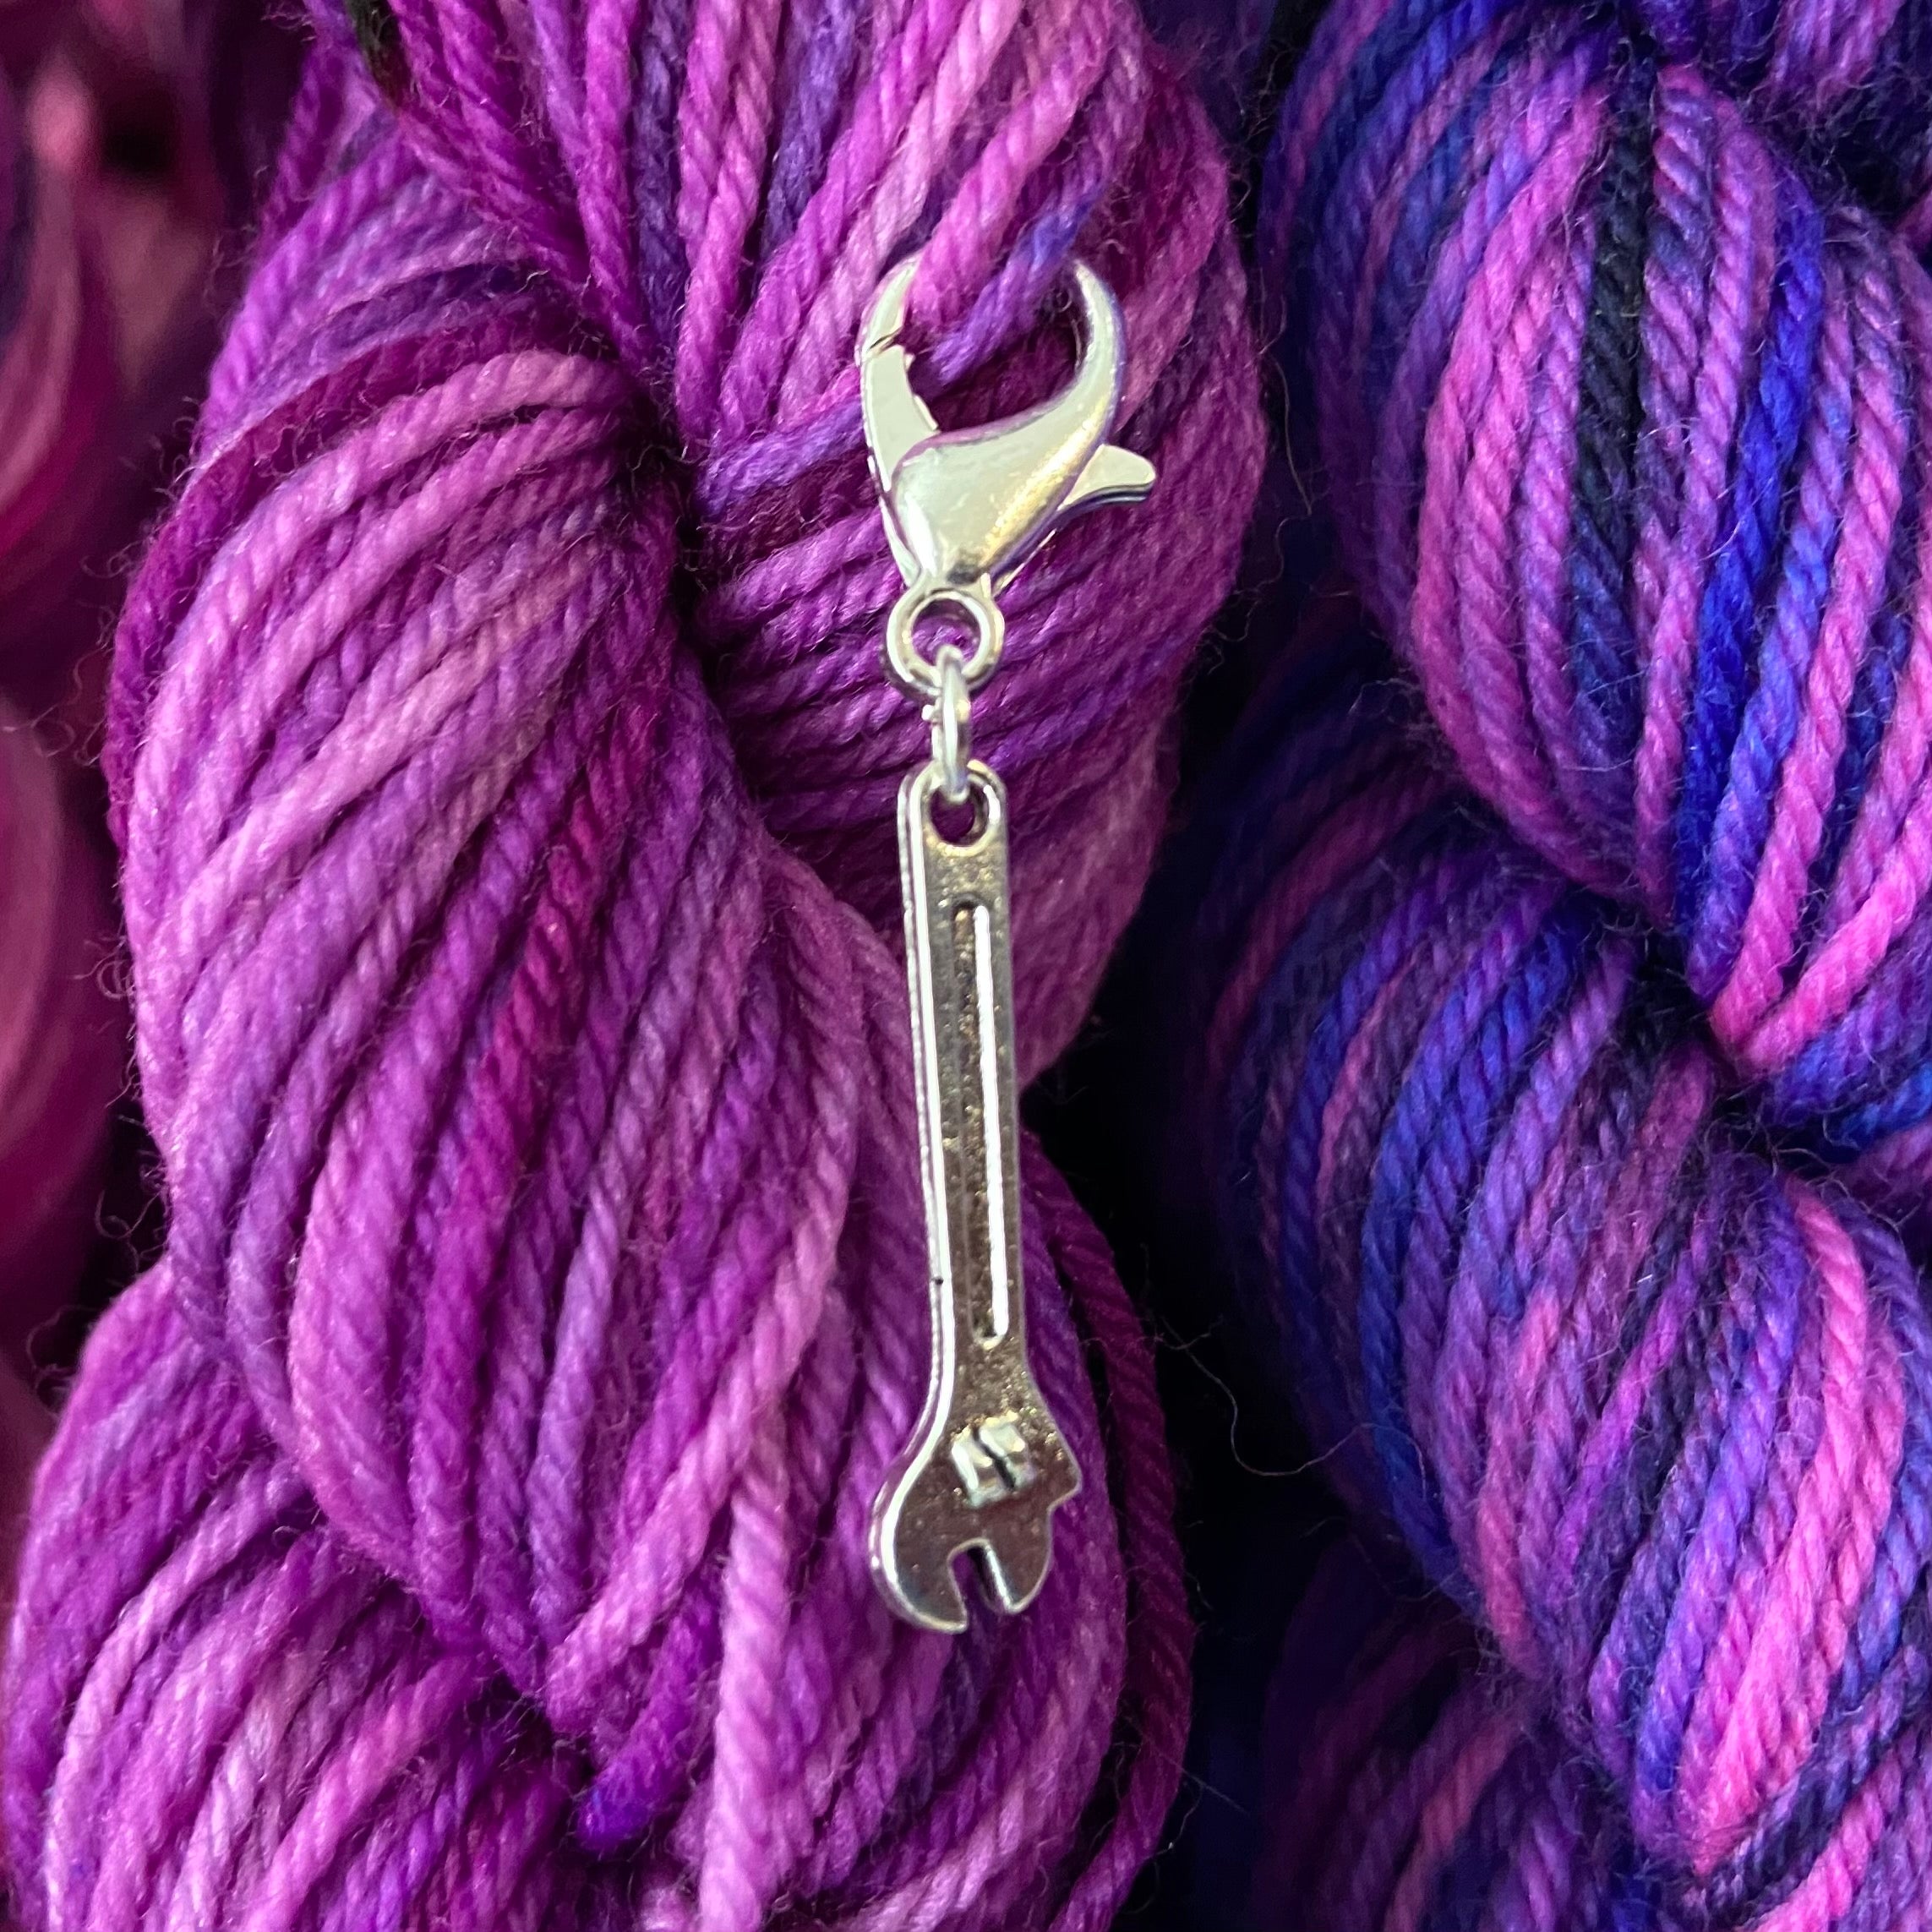 Double Sided Wrench Snagless Stitch Marker or Clasp Place Keeper